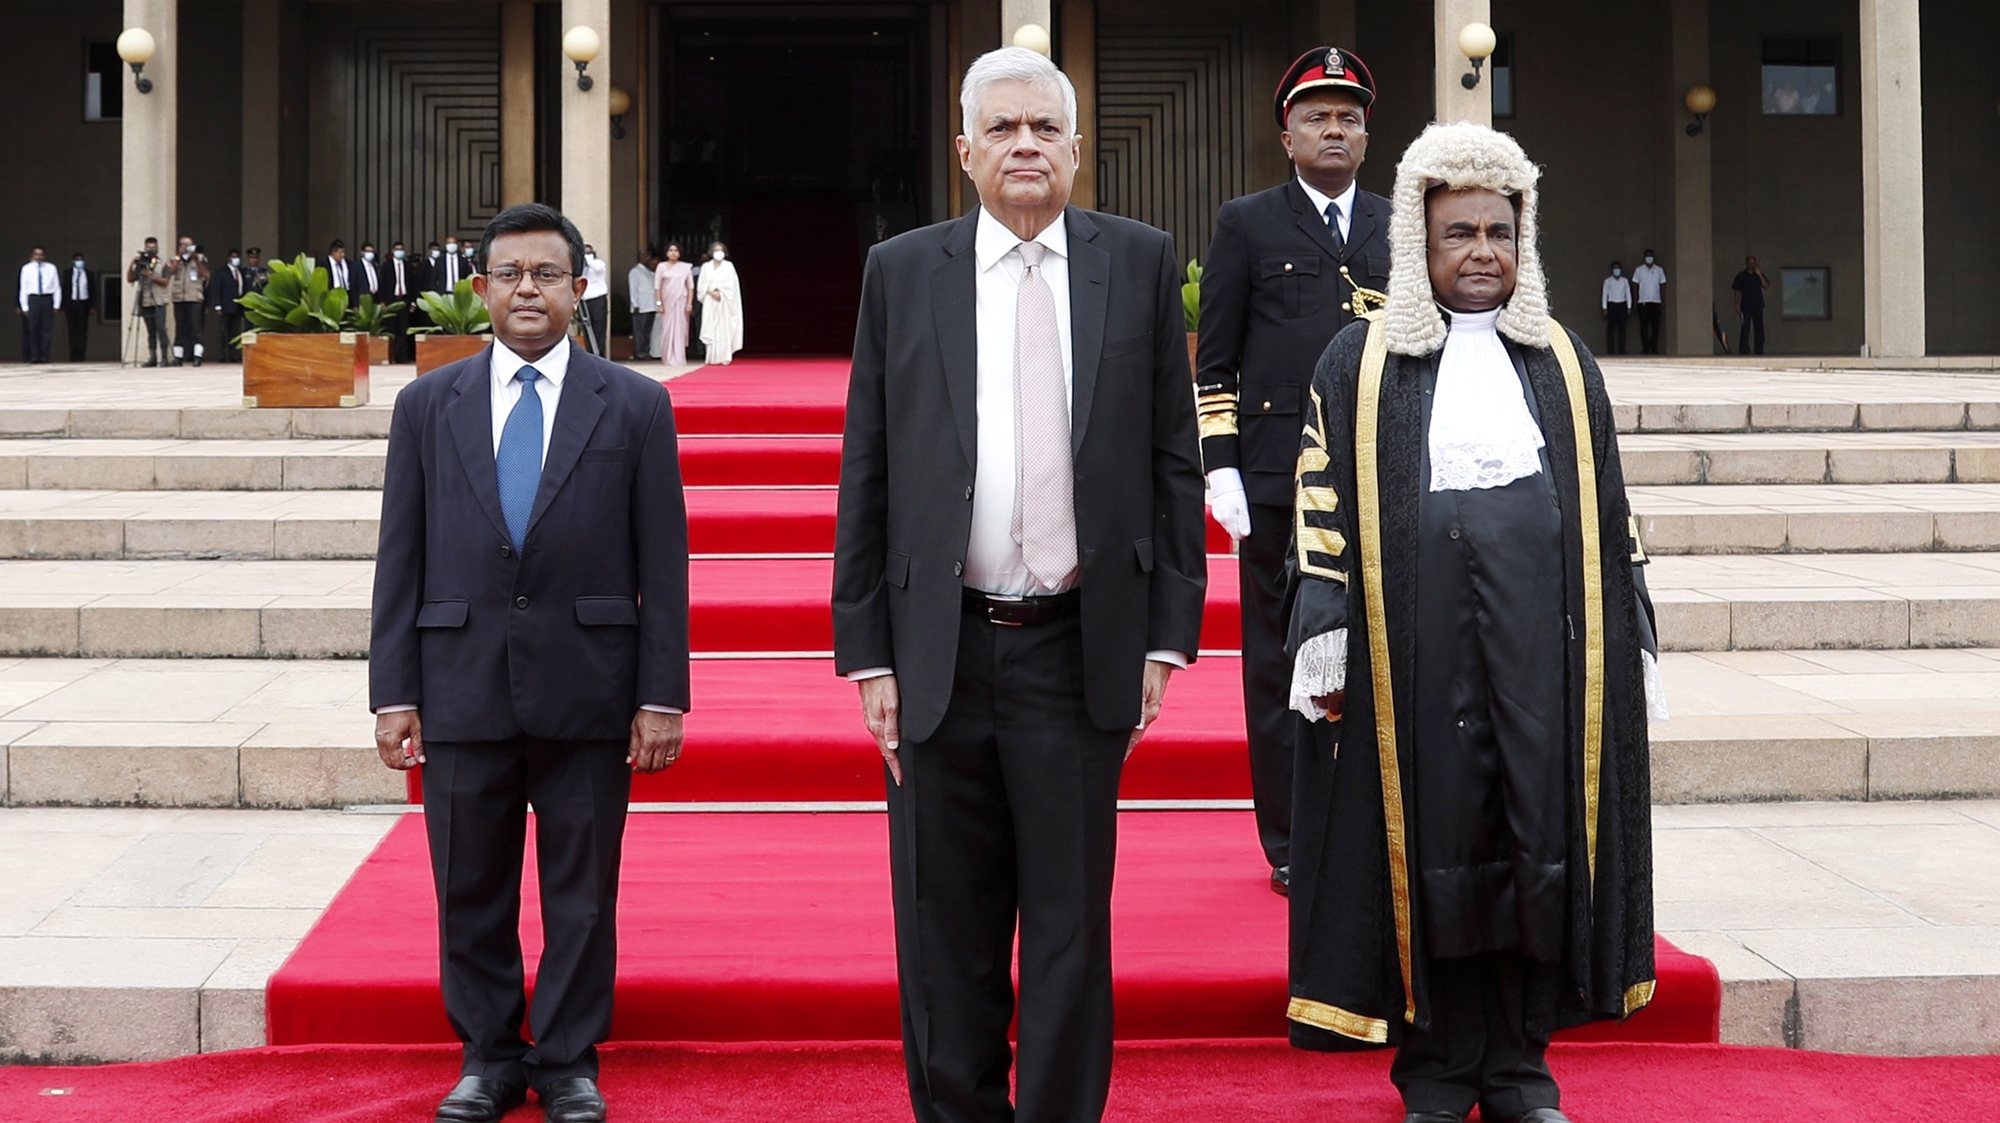 epa10083554 A handout photo made available by the Sri Lankan Parliament Media Unit shows Ranil Wickremesinghe (C) arrives to his swearing-in ceremony at the parliamentary complex in Colombo, Sri Lanka, 21 July 2022. The Sri Lankan parliament the previous day elected Ranil Wickremesinghe as the country&#039;s new President, after accepting the resignation of President Rajapaksa who fled to Singapore through the Maldives following months of anti-government protests fueled by the ongoing economic crisis.  EPA/Sri Lankan Parliament Media Unit  HANDOUT EDITORIAL USE ONLY/NO SALES